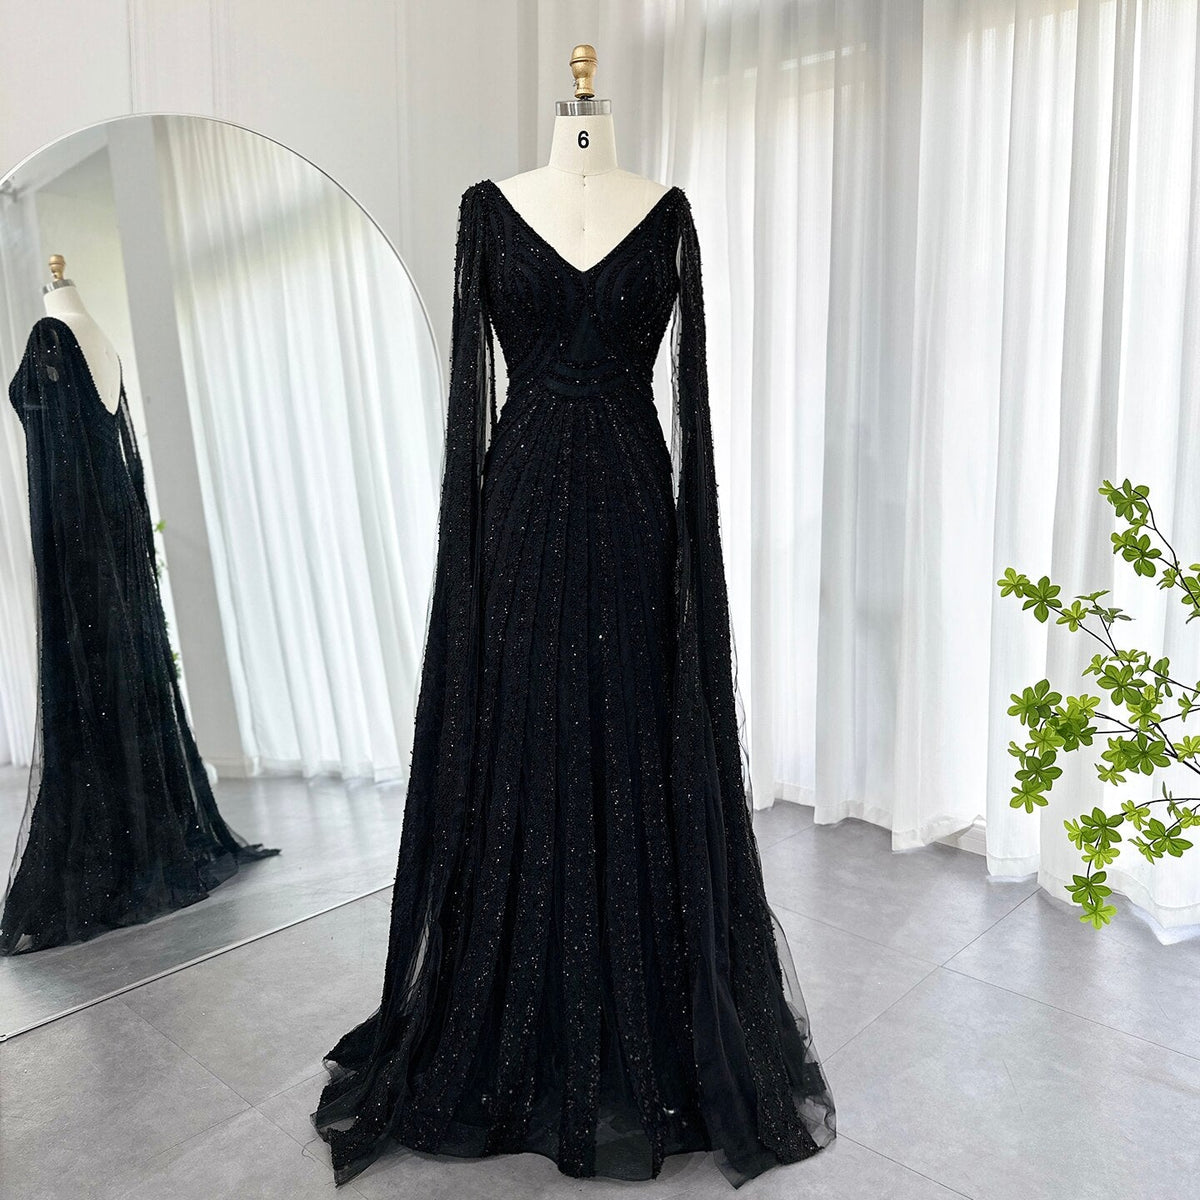 Dreamy Vow Black Arabic Mermaid Evening Dresses with Cape Sleeves 2023 Luxury Beaded Dubai For Women Wedding Party Gowns 218